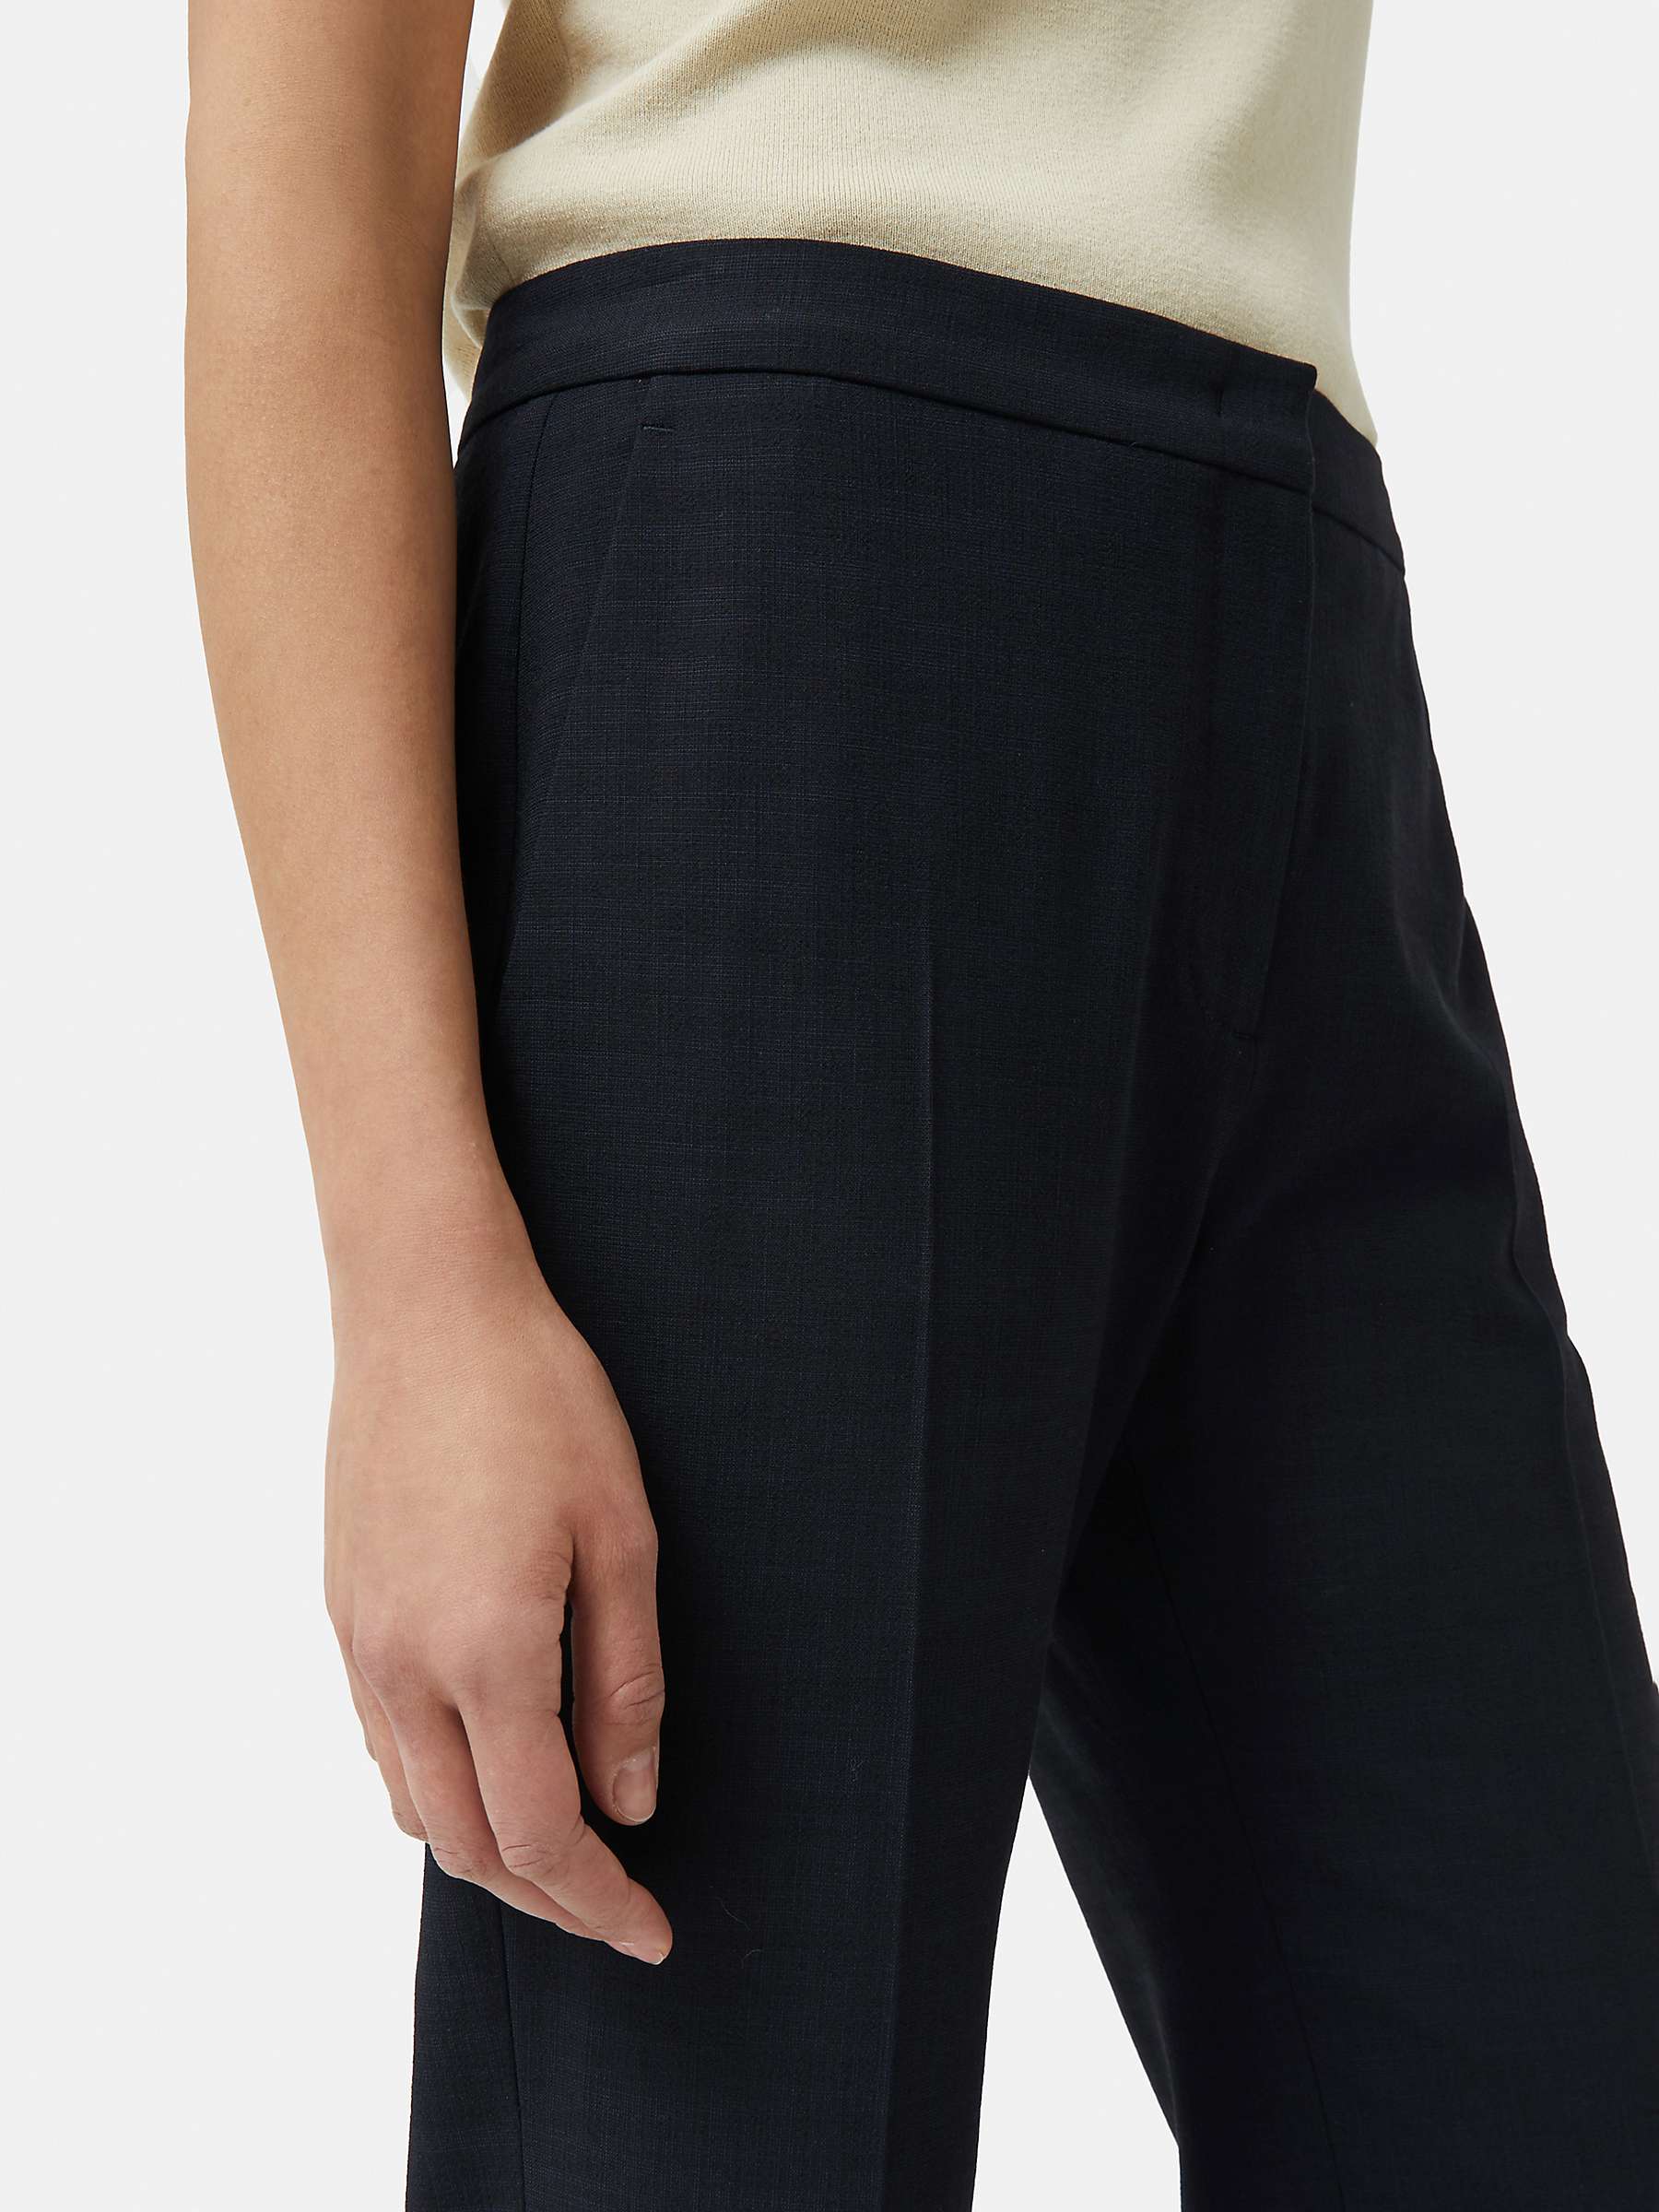 Buy Jigsaw Crosshatch Mason Tailored Trousers, Navy Online at johnlewis.com